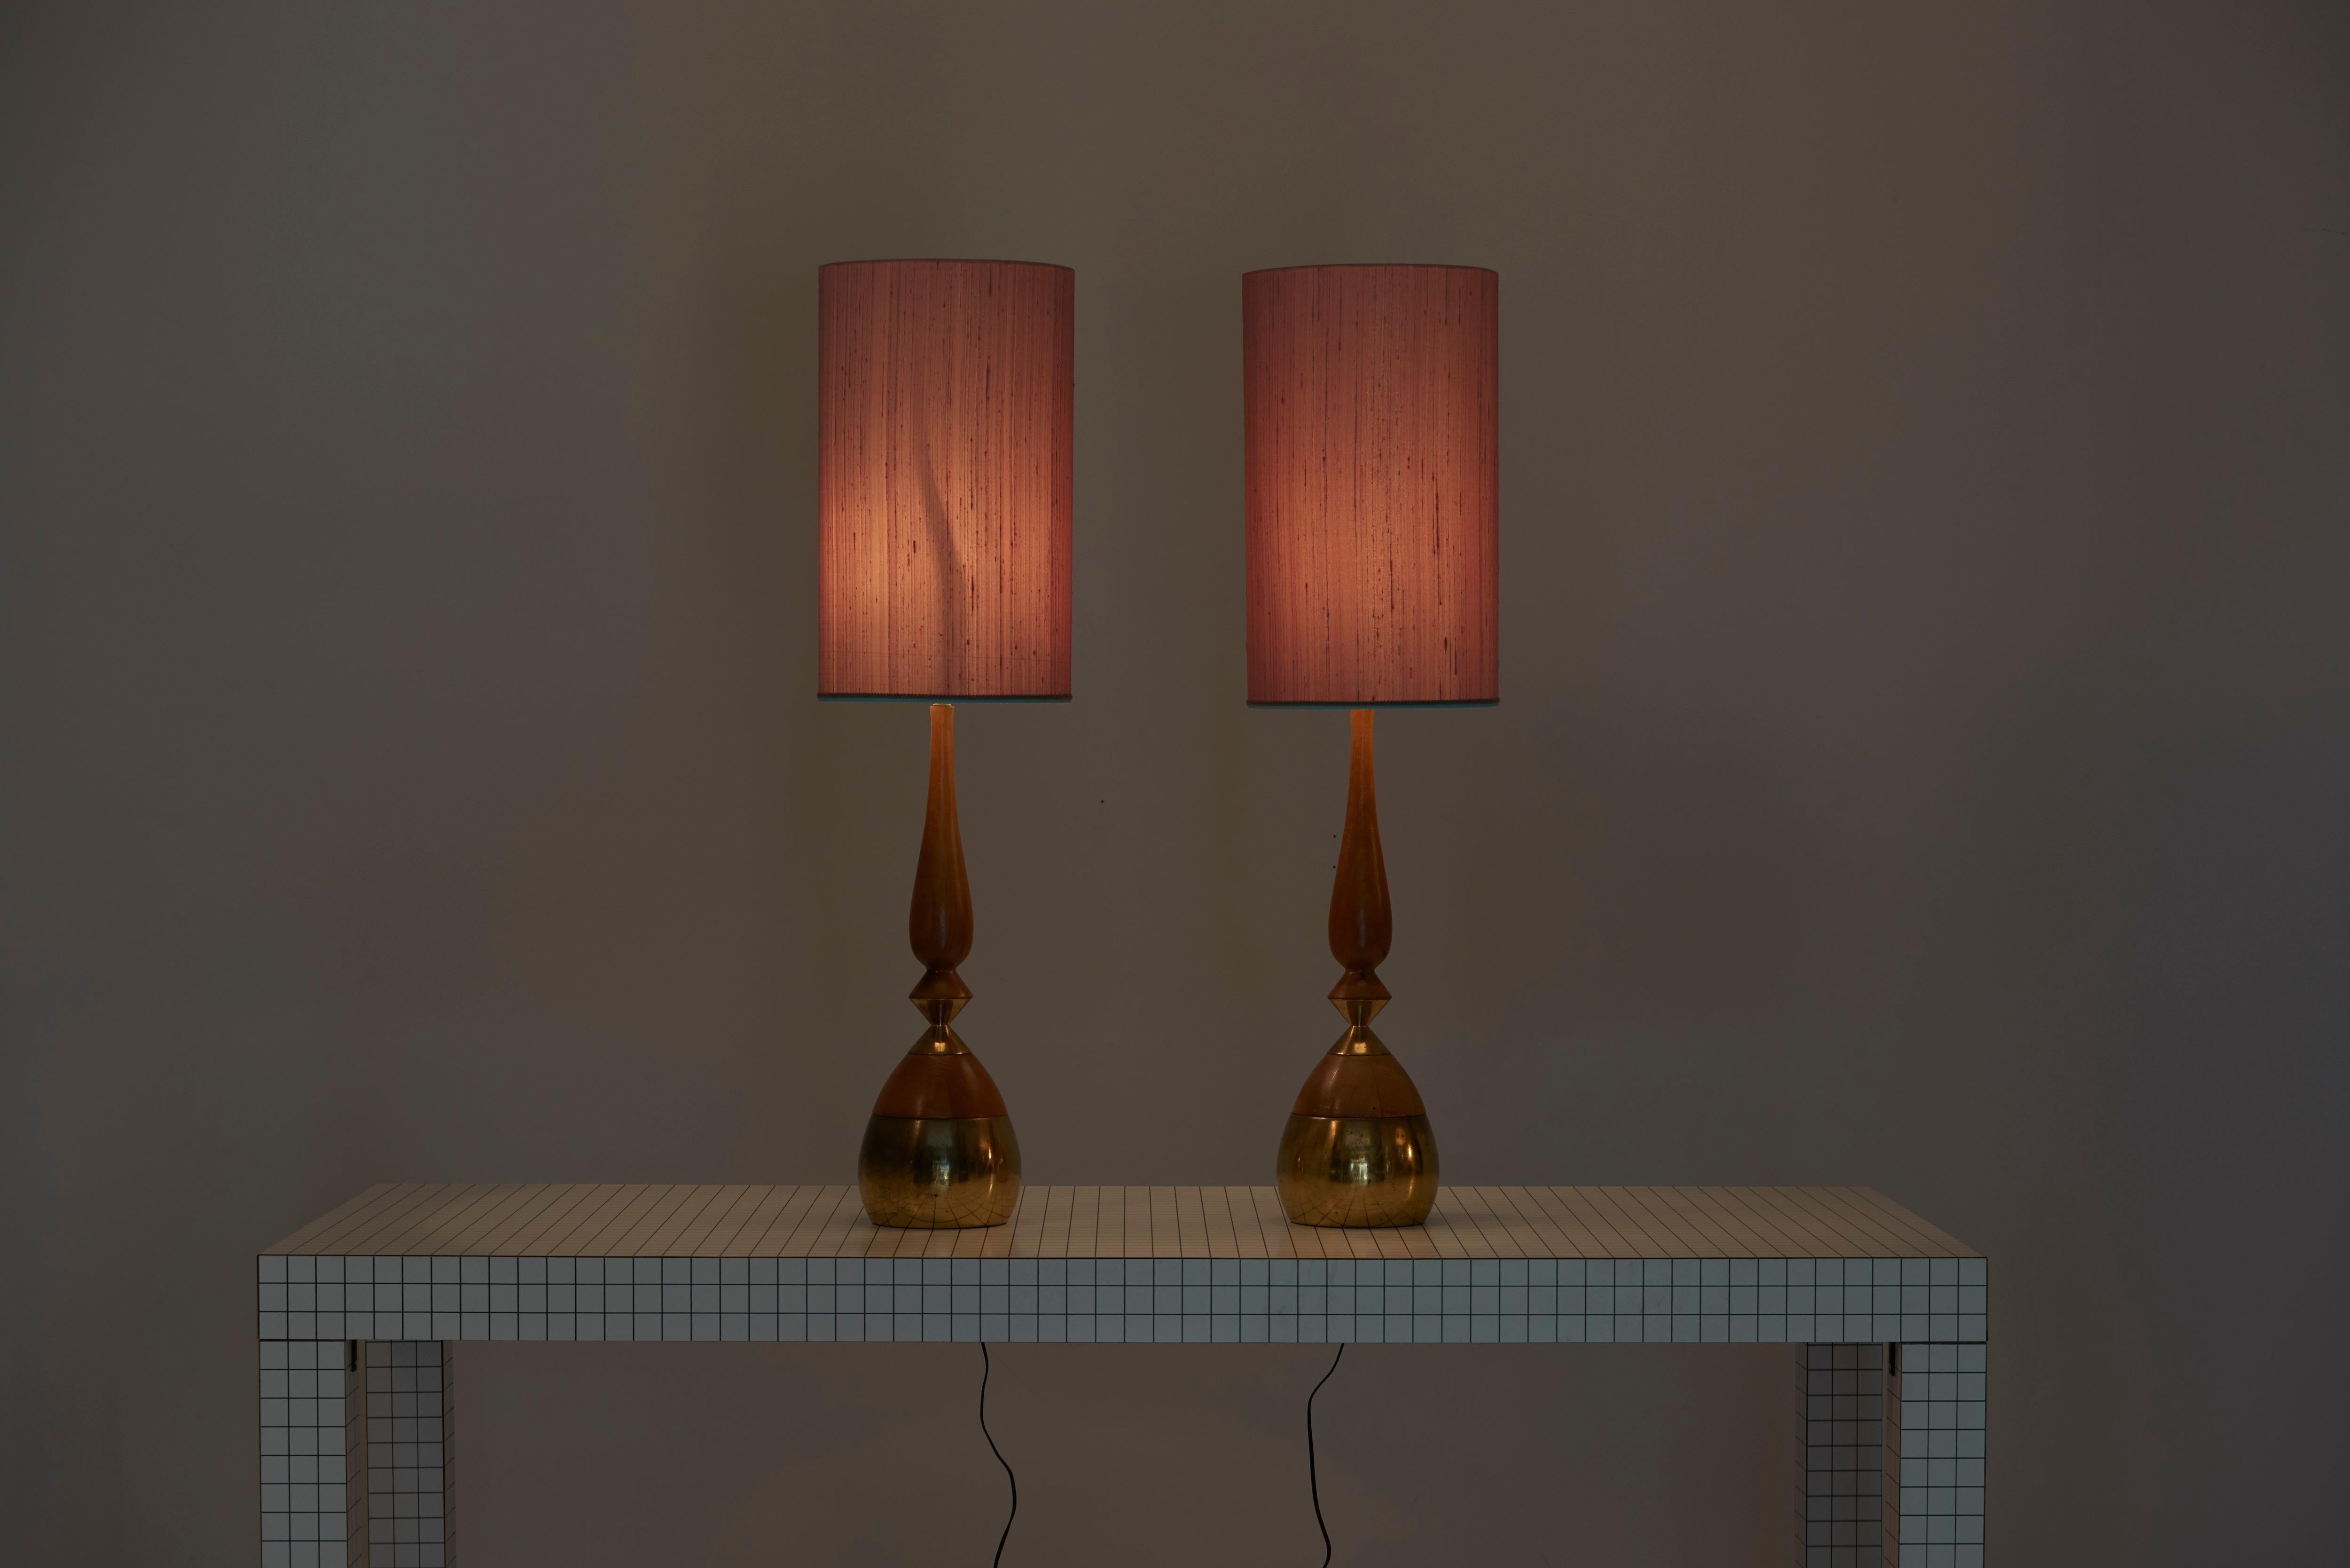 Pair of table lamps in brass and walnut, designed by Tony Paul and manufactured by Westwood Lighting.
Including new custom lampshades.

1 x E27 socket / each.

Please note: Lamp should be fitted professionally in accordance to local requirements.